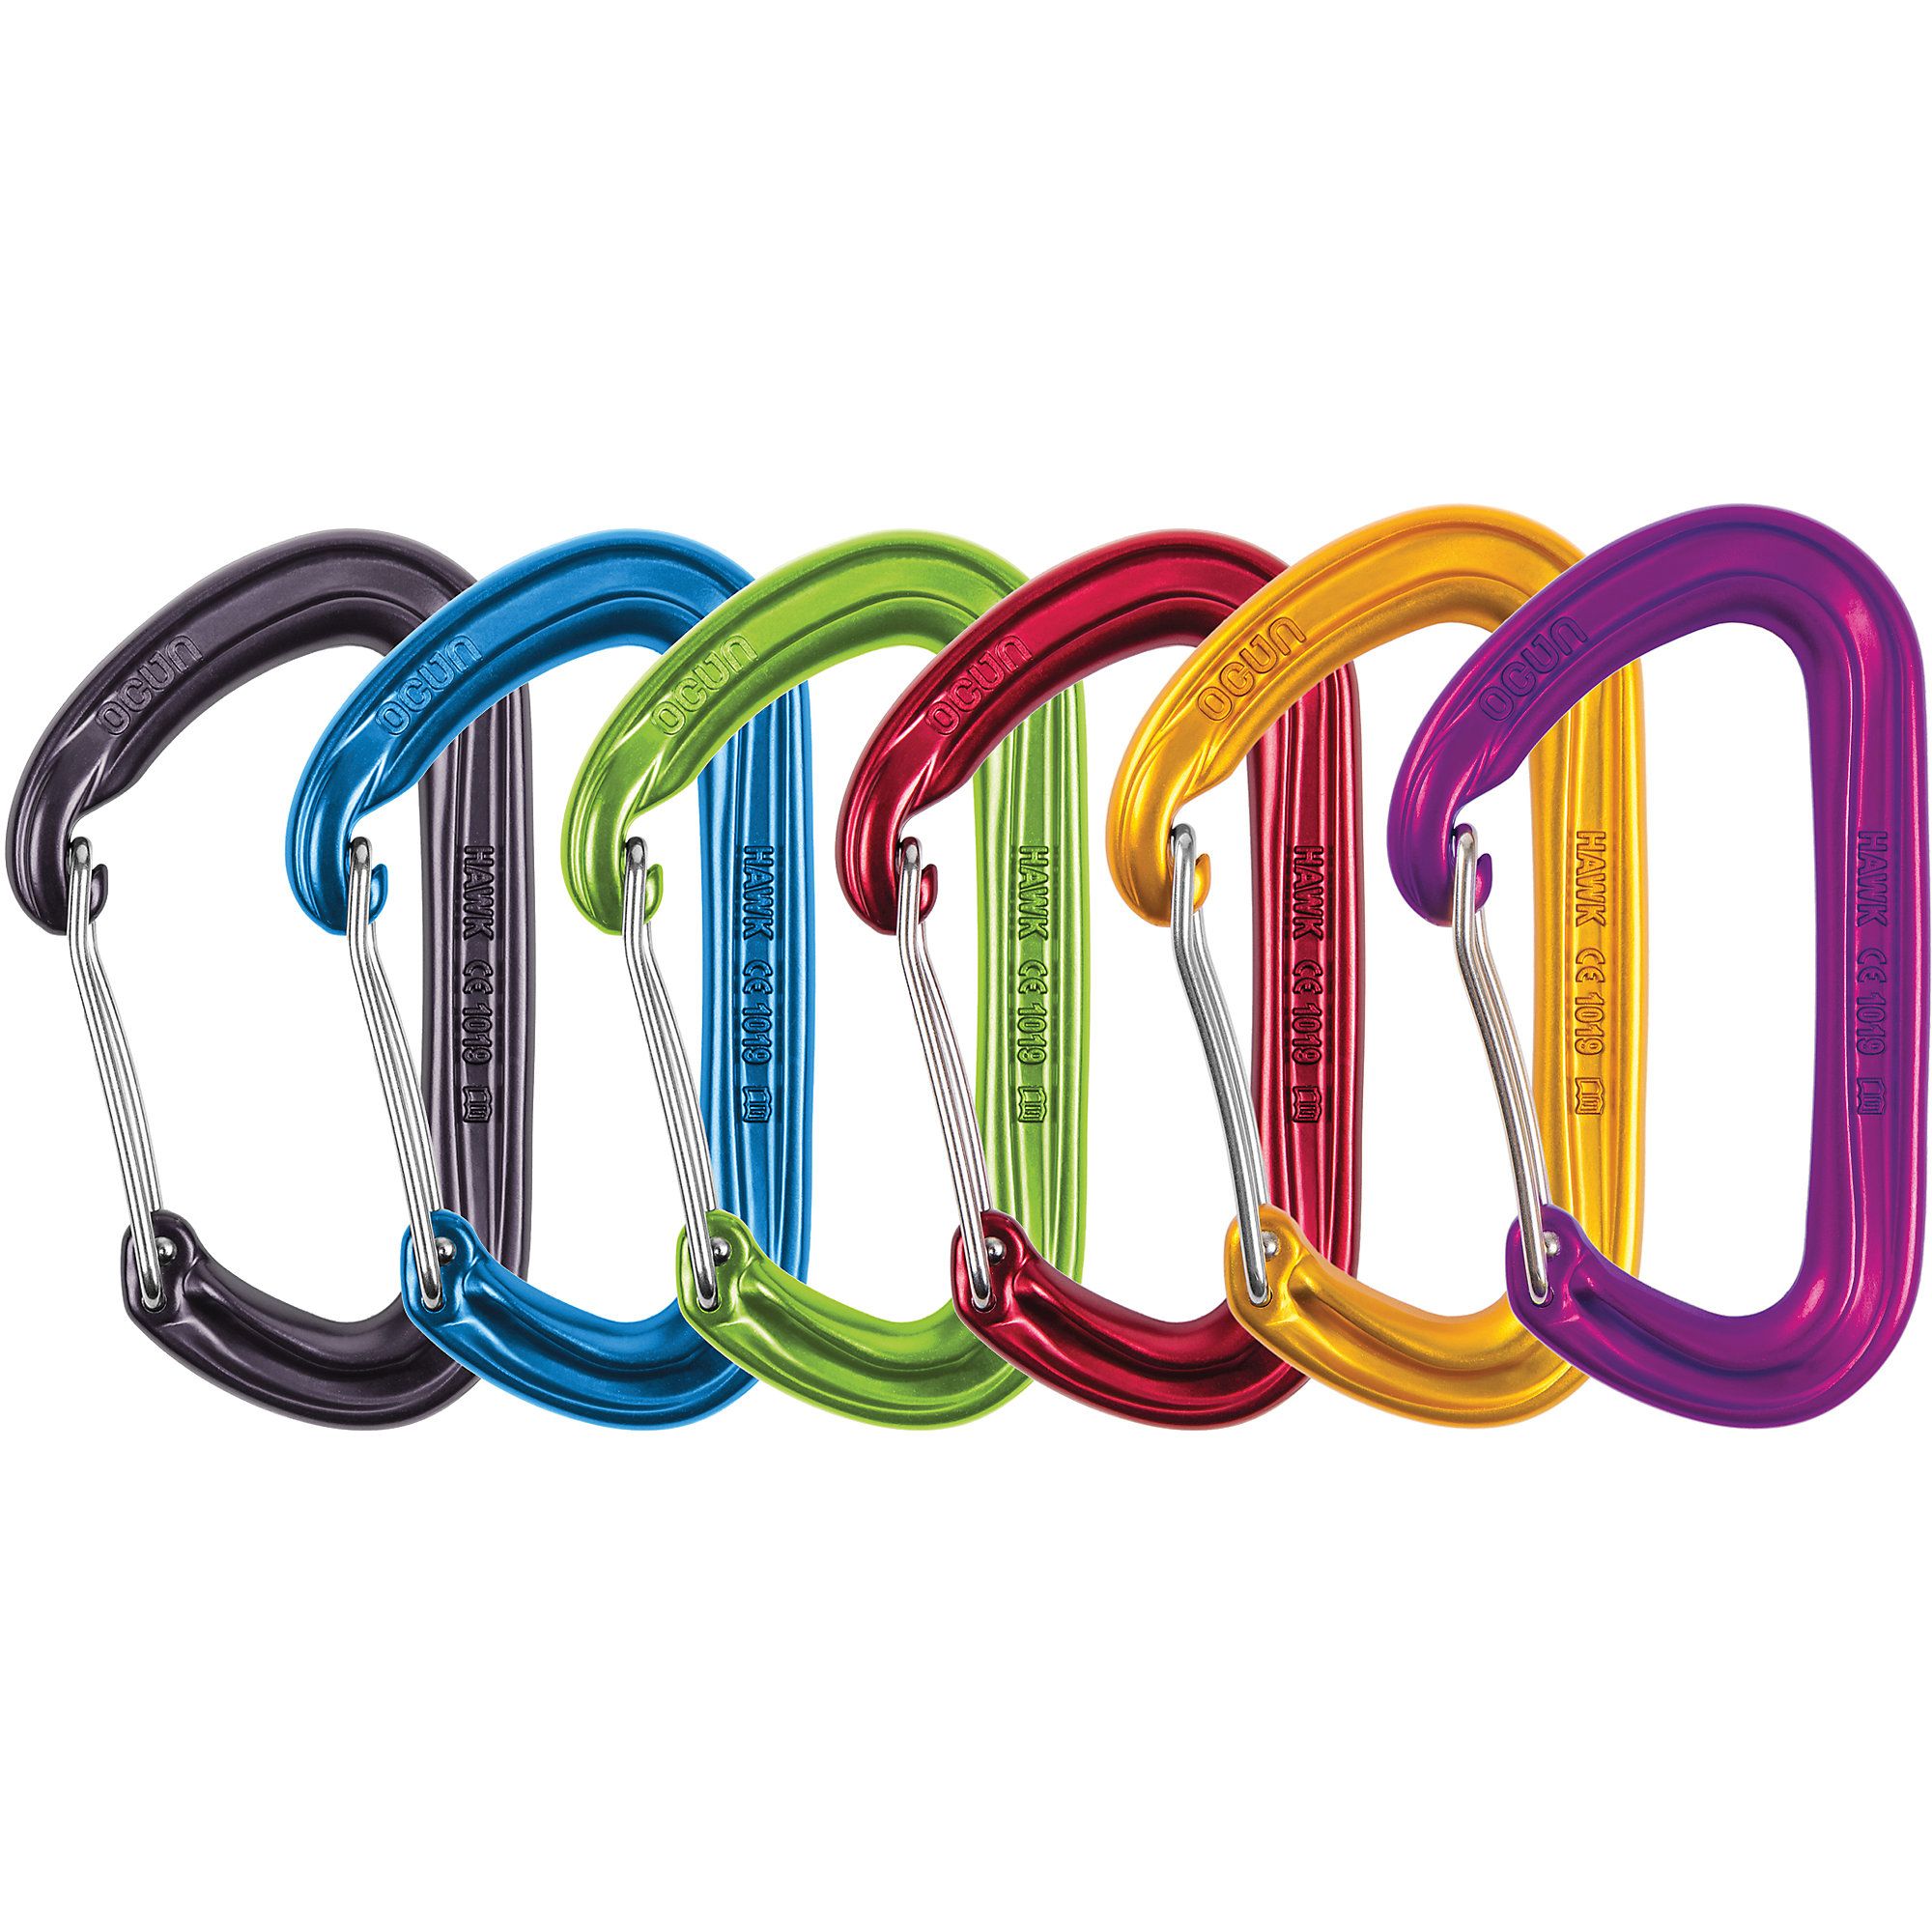 Photos - Climbing Gear Ocun Hawk Wire Carabiner - 6 Pack 23KNCUHWKWRCRBNR6CAC 